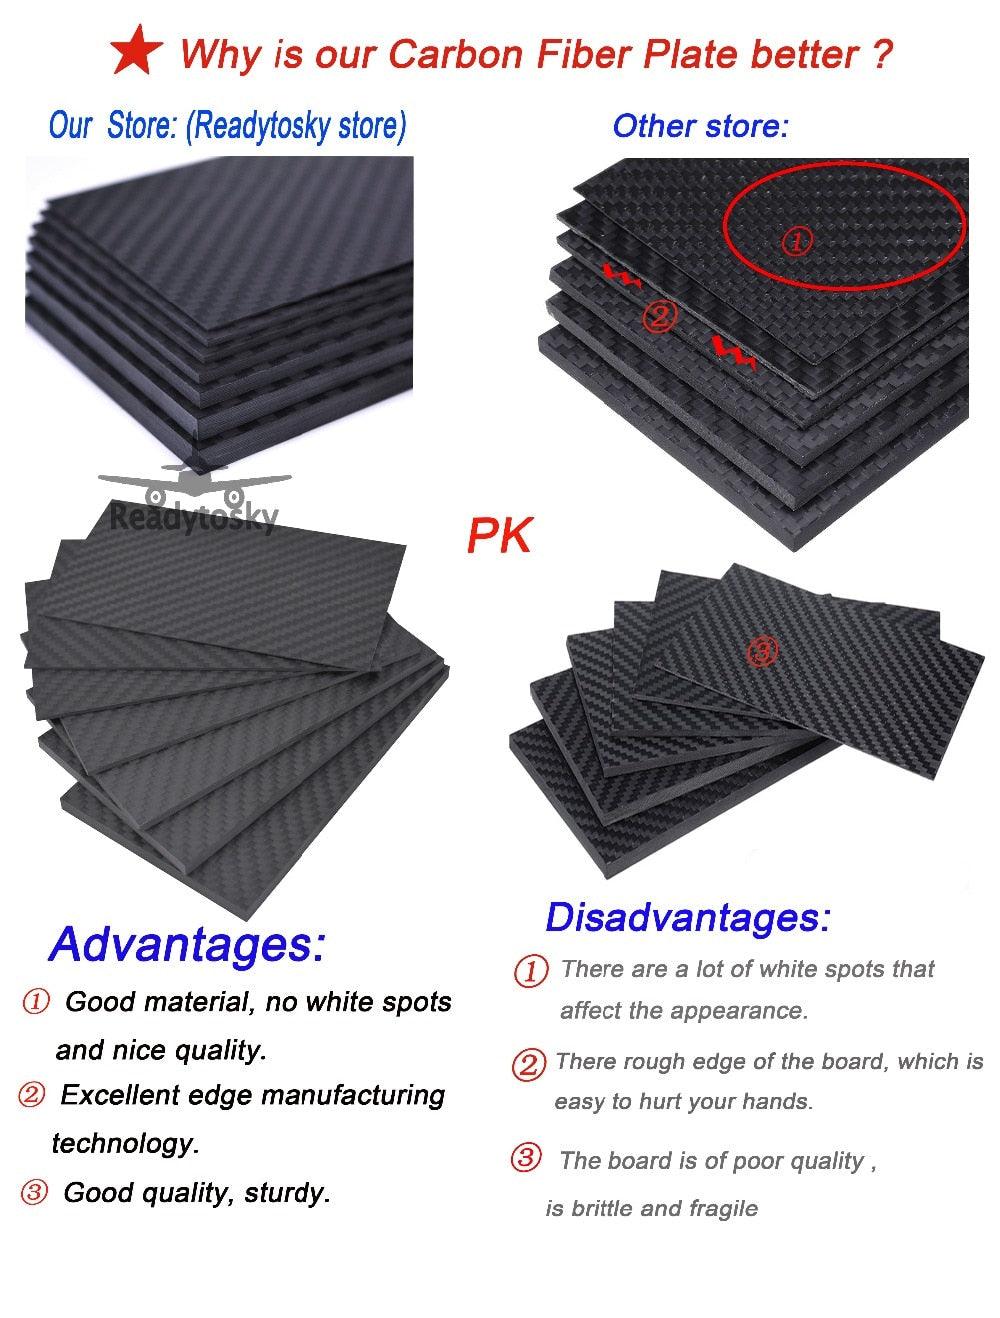 400mm X 200mm Real Carbon Fiber Plate Panel Sheets 0.5mm 1mm 1.5mm 2mm 3mm 4mm 5mm Thickness Composite Hardness Material - RCDrone